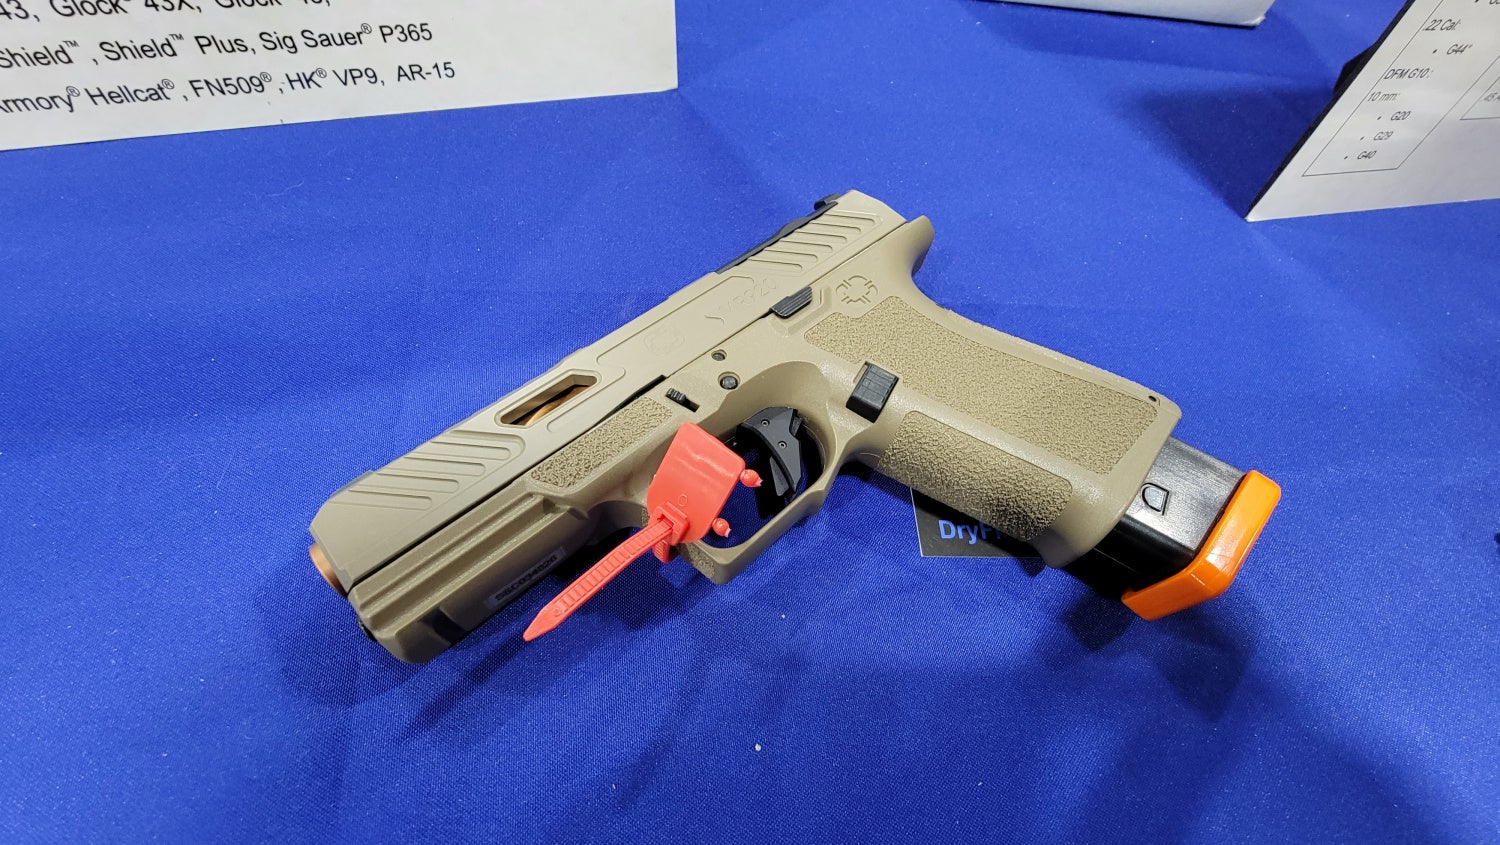 New DryFireMag Models Coming in 2022 - Glock, S&W, AR-15, and More!